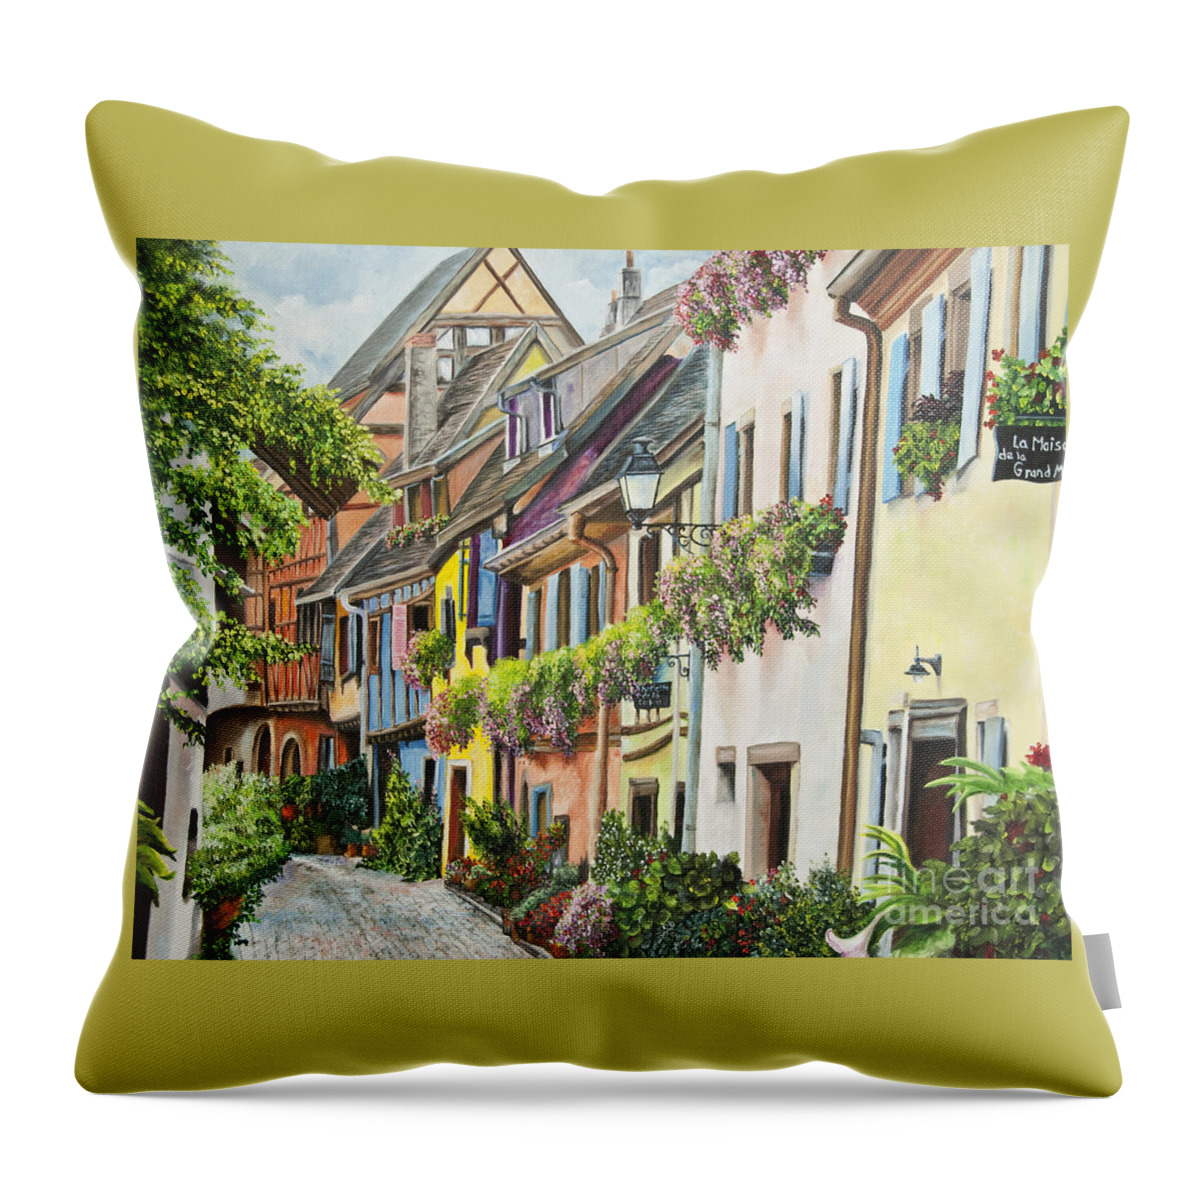 Eguisheim Throw Pillow featuring the painting Eguisheim In Bloom by Charlotte Blanchard